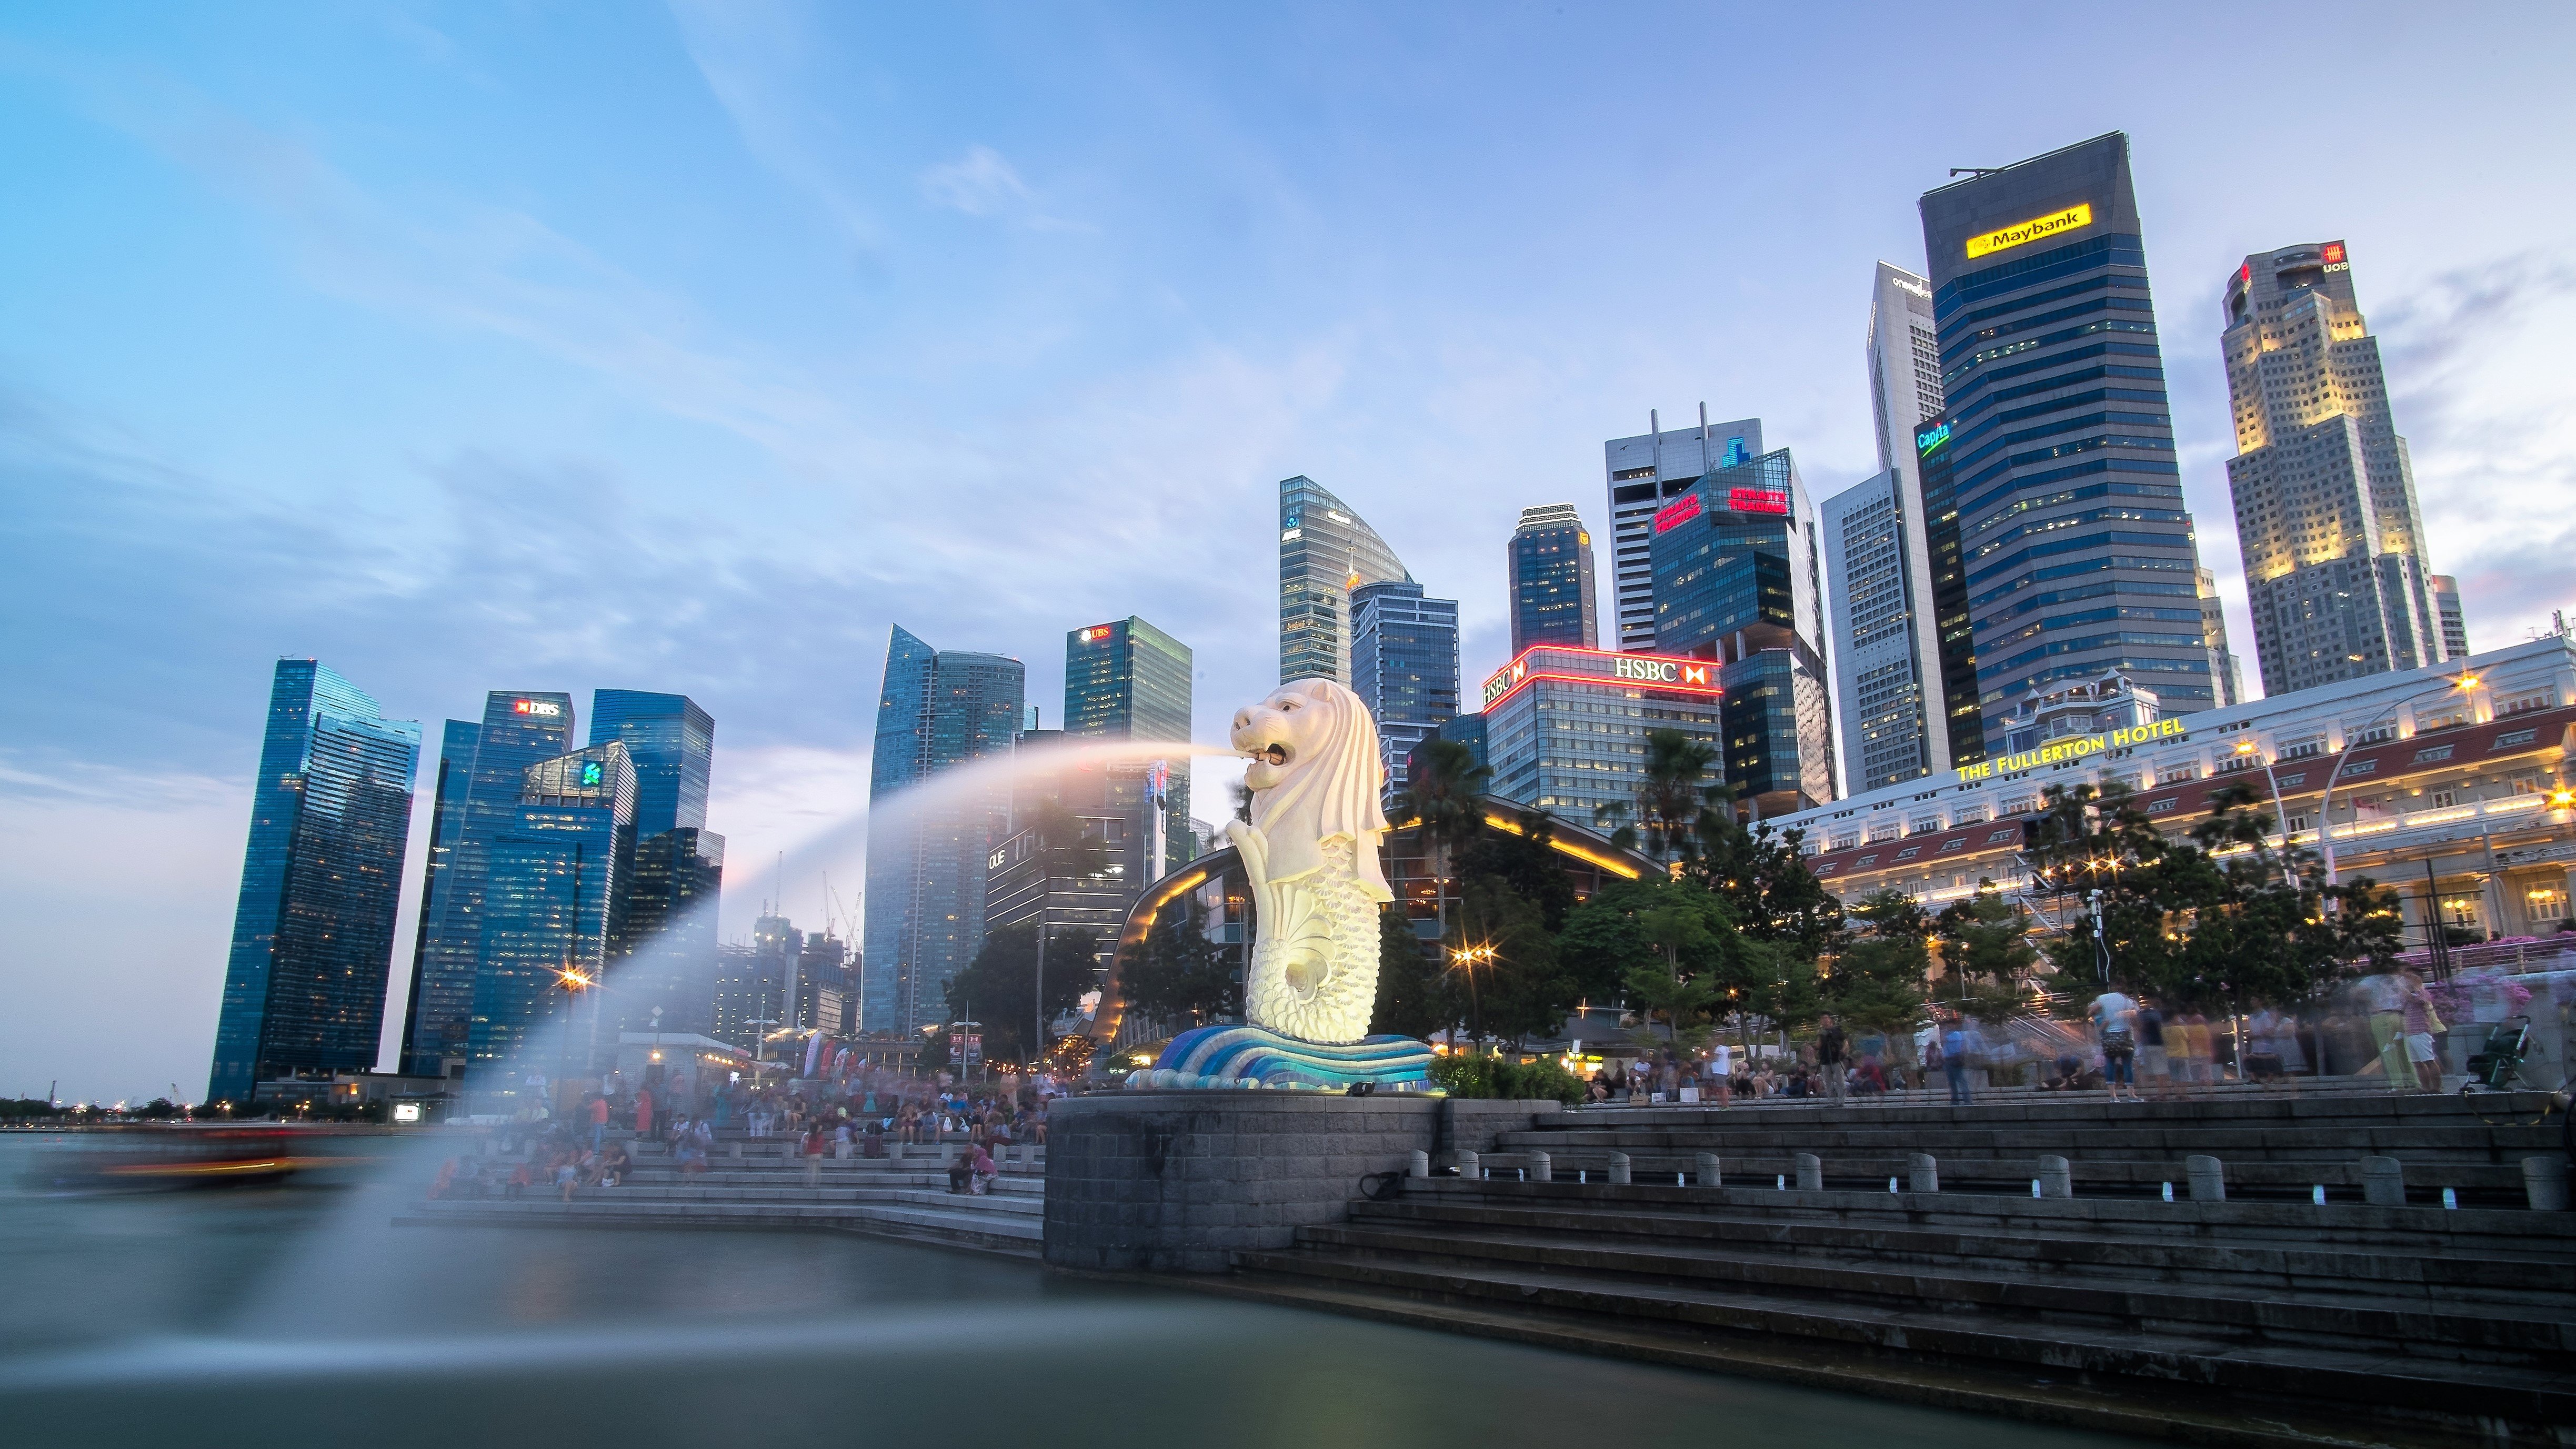 Singapore's Merlion and Central Business District